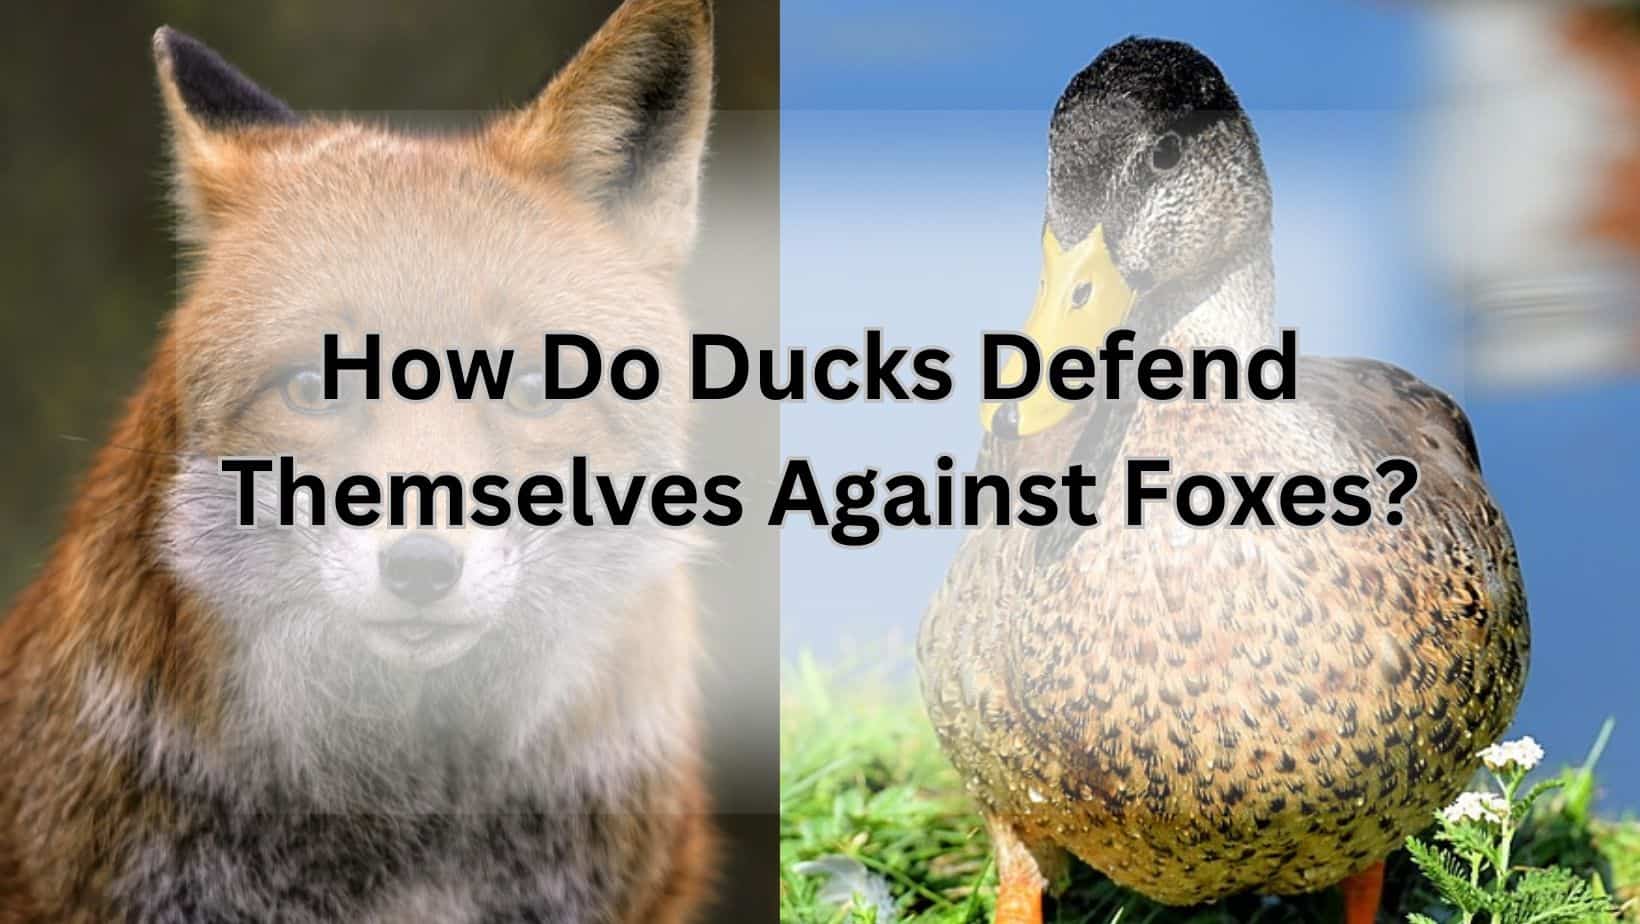 How Do Ducks Defend Themselves Against Foxes?